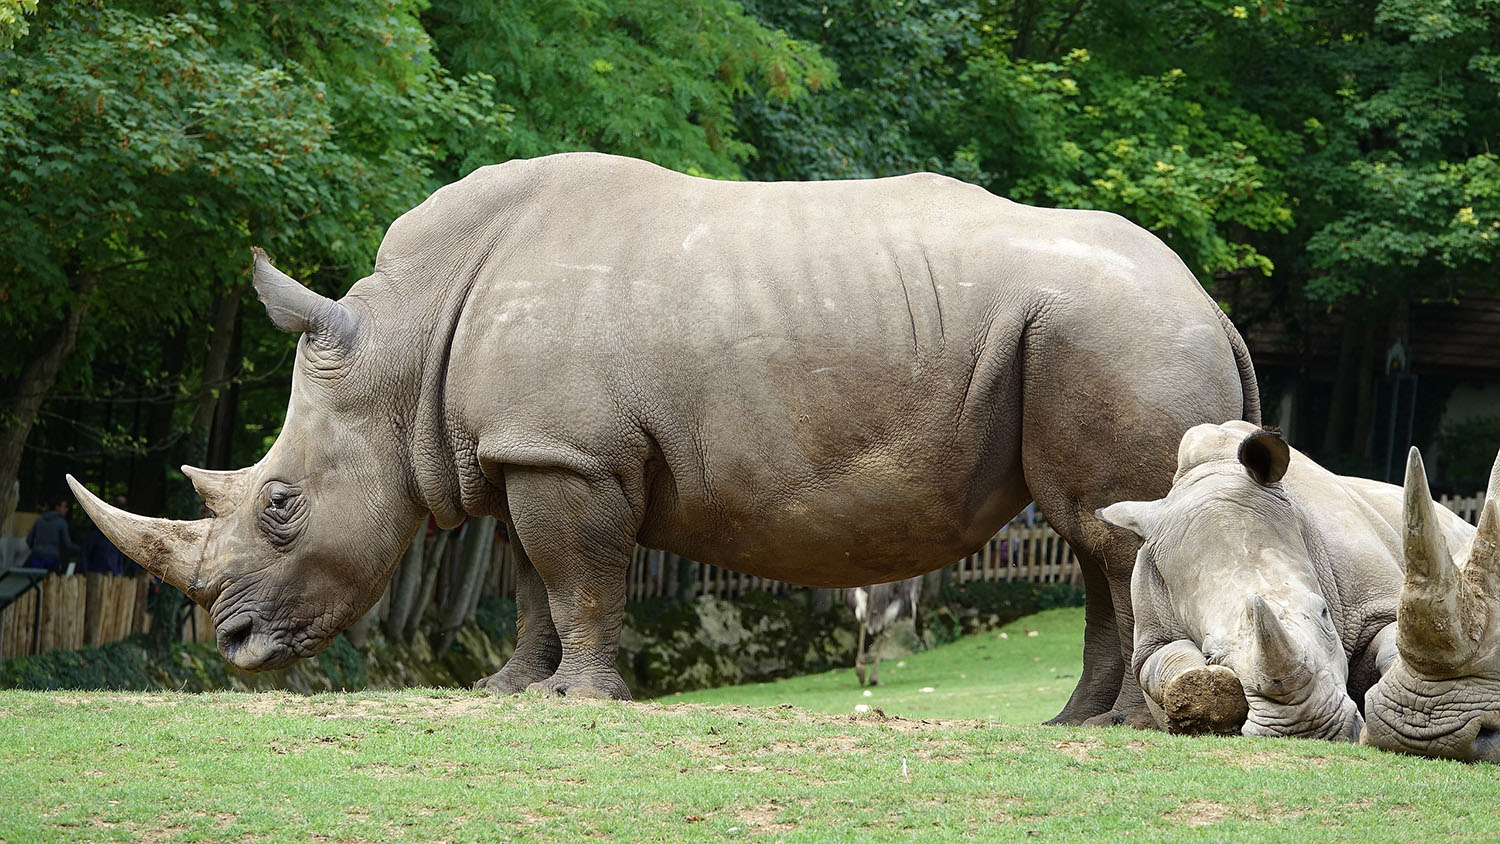 a greyish rhinoceros stands on a grassy hill; several other rhinos are sleeping on the ground nearby